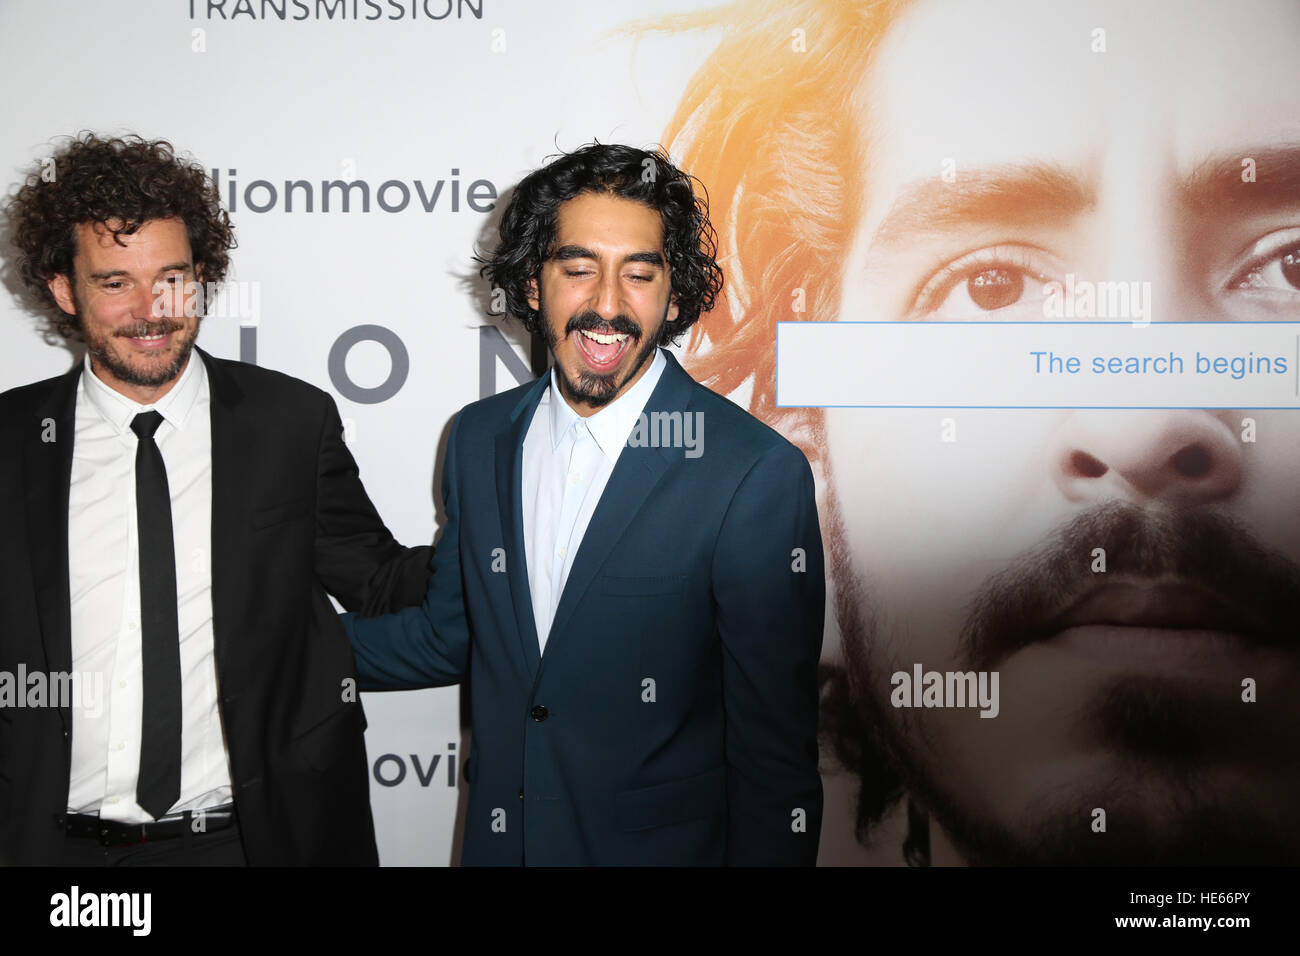 Sydney, Australia. 19 December 2016. Pictured: Garth Davis and Dev Patel. The cast and crew of LION arrived on the red carpet for the Australian premiere at the State Theatre in Sydney.  The highly anticipated film comes from the producers of The King’s Speech and is based on the incredible true story of Saroo Brierley. Saroo is portrayed by Dev Patel in the film and his parents John and Sue Brierley are played by Nicole Kidman and David Wenham – the Brierley family will join the cast on the red carpet. Credit: © Richard Milnes/Alamy Live News Stock Photo